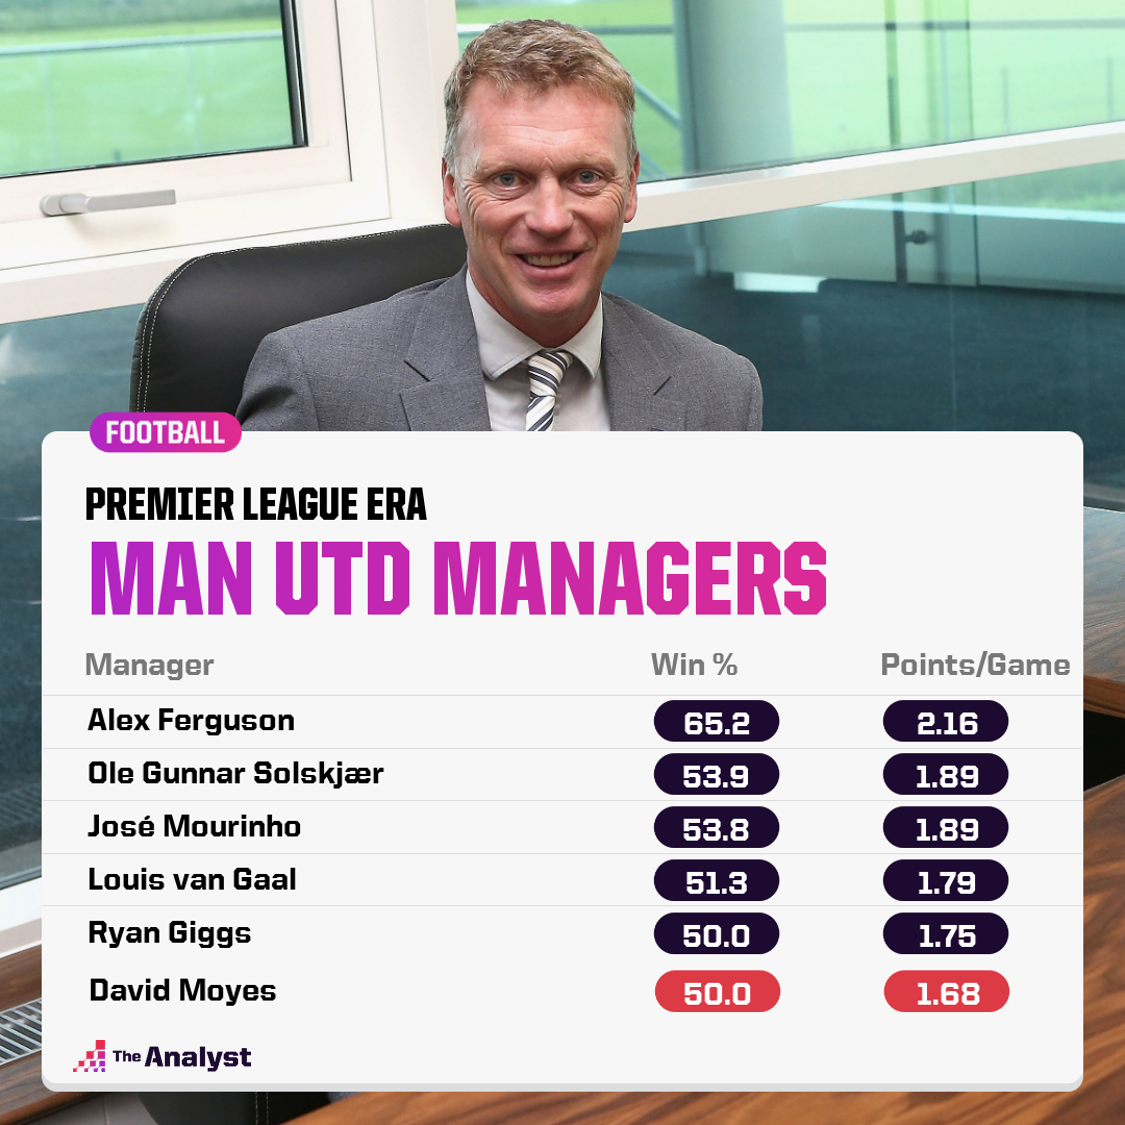 David Moyes' time at Manchester United was underwhleming, but was he really as bad as we were made to believe?